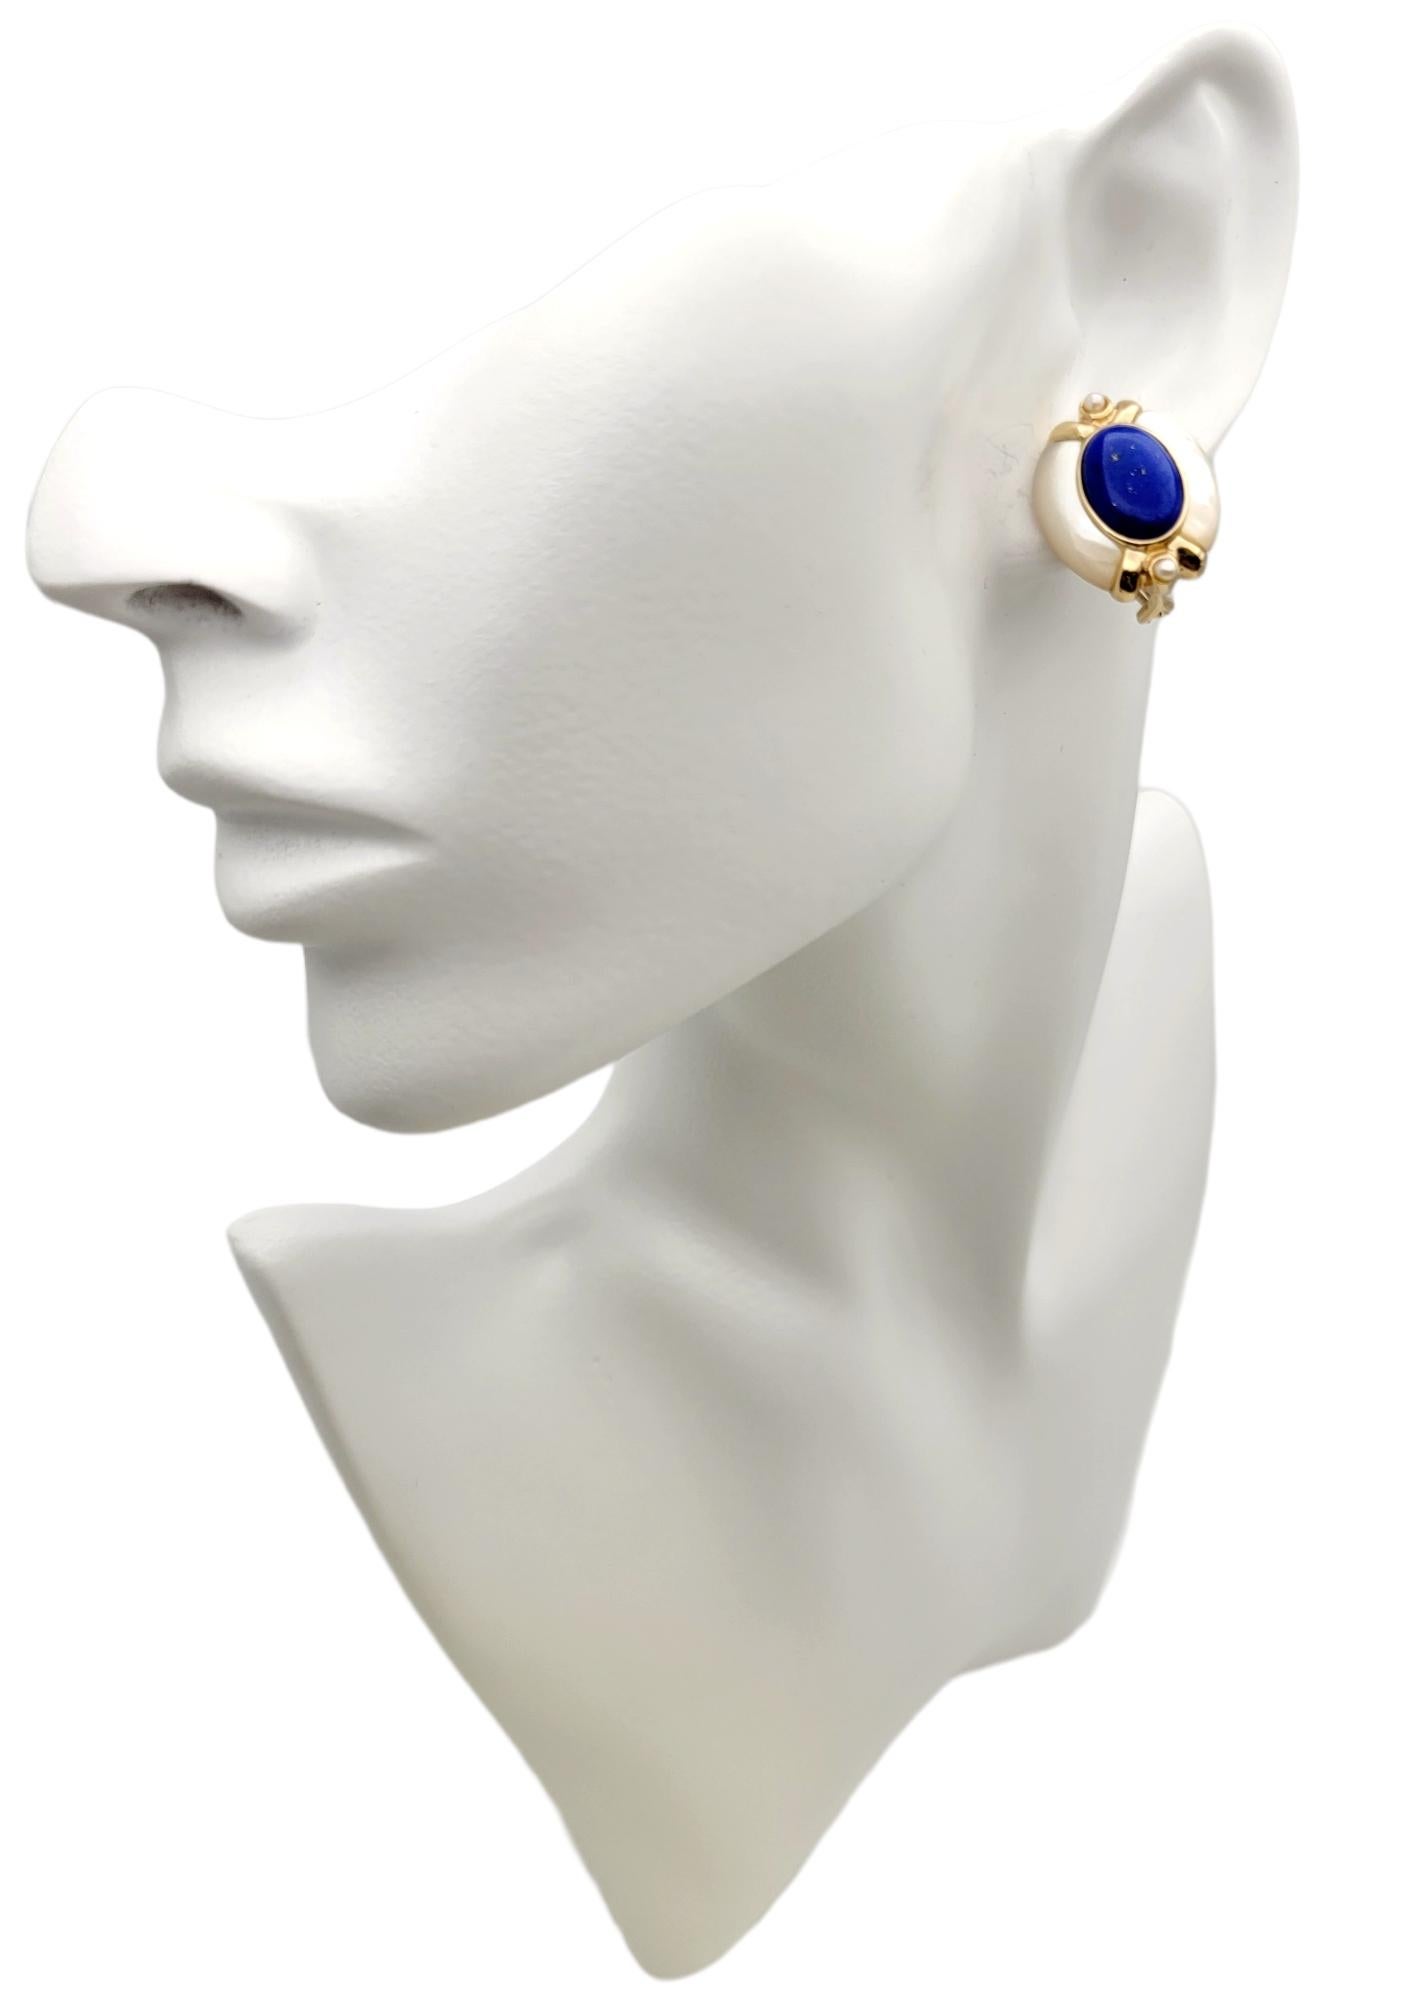 Oval Lapis Lazuli, Mother of Pearl and Seed Pearl Pierced Earrings 14 Karat Gold In Good Condition For Sale In Scottsdale, AZ